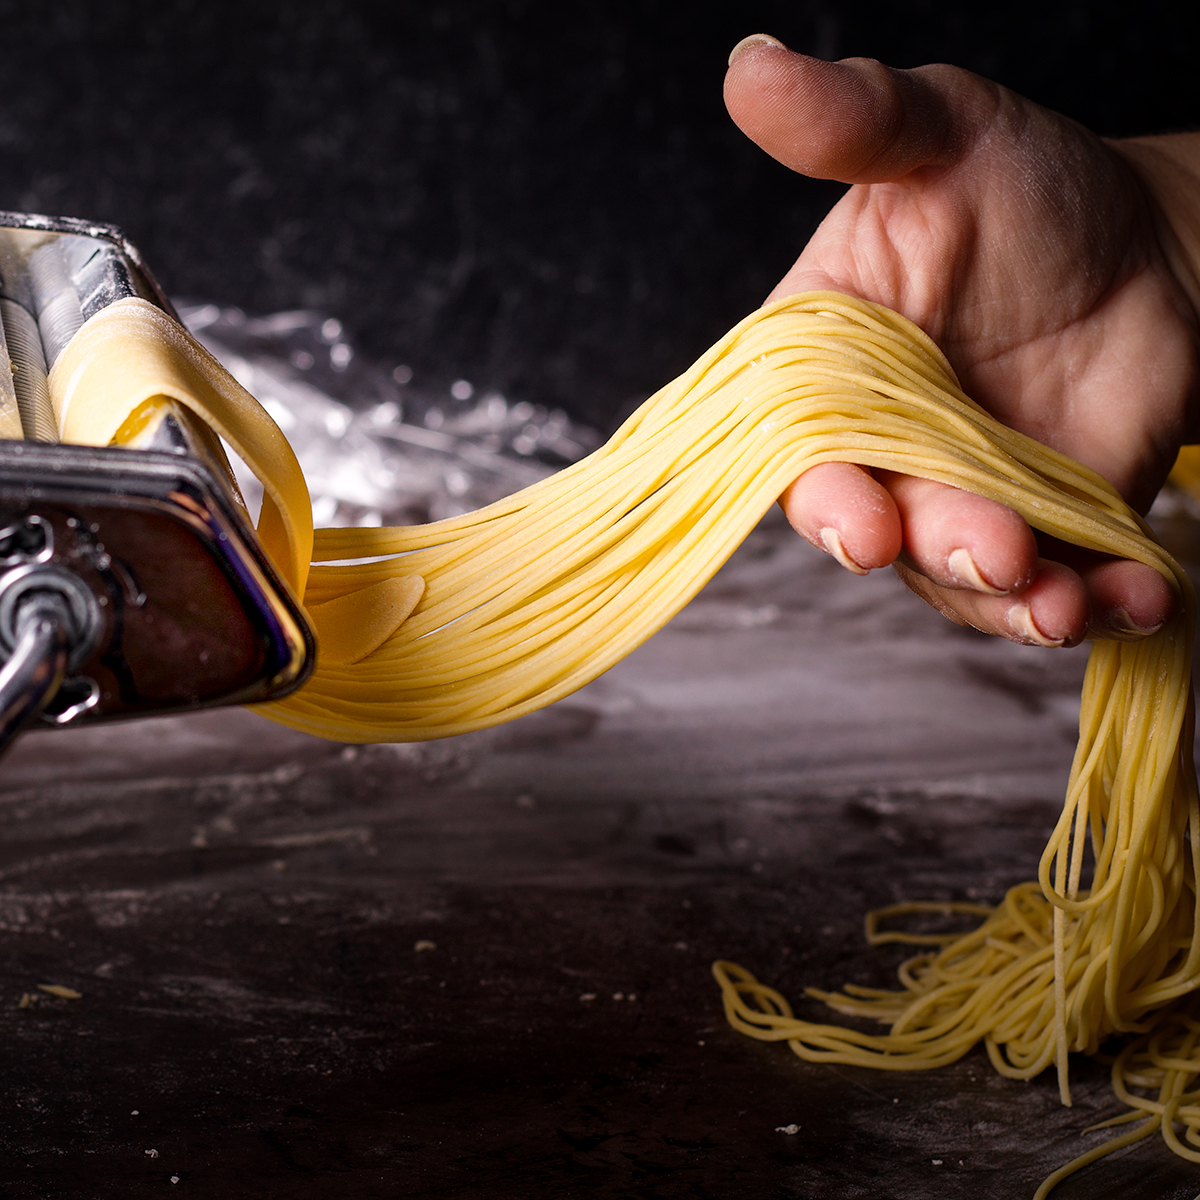 Rolling a sheet of pasta dough through the noodle cutting attachment to cut it into strands of spaghetti.